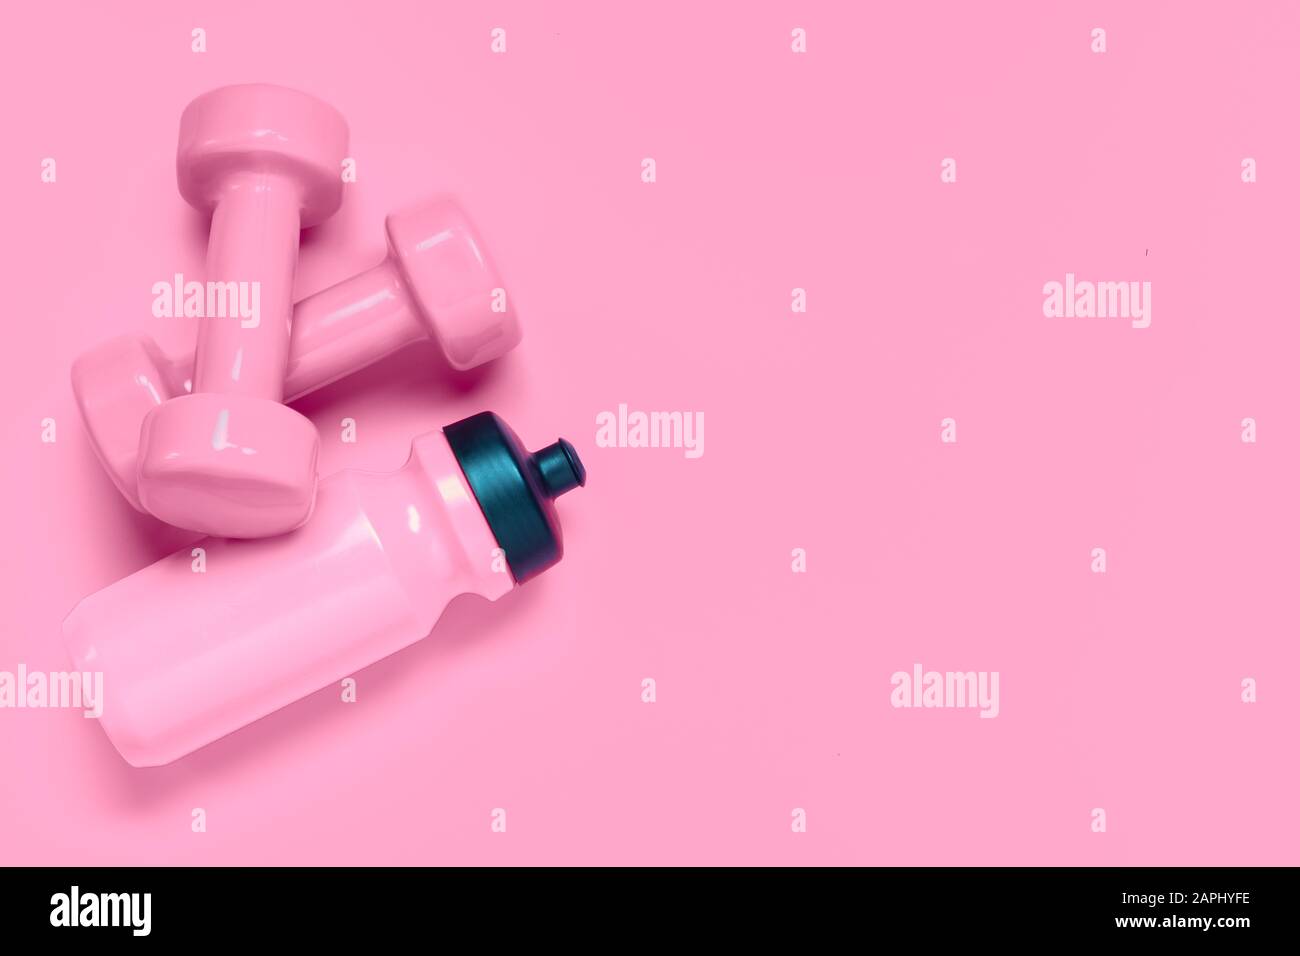 https://c8.alamy.com/comp/2APHYFE/fitness-workout-background-concept-with-pink-dumbbells-and-bottle-of-water-top-view-flatlay-sport-diet-and-healthy-lifestyle-with-training-equipment-2APHYFE.jpg